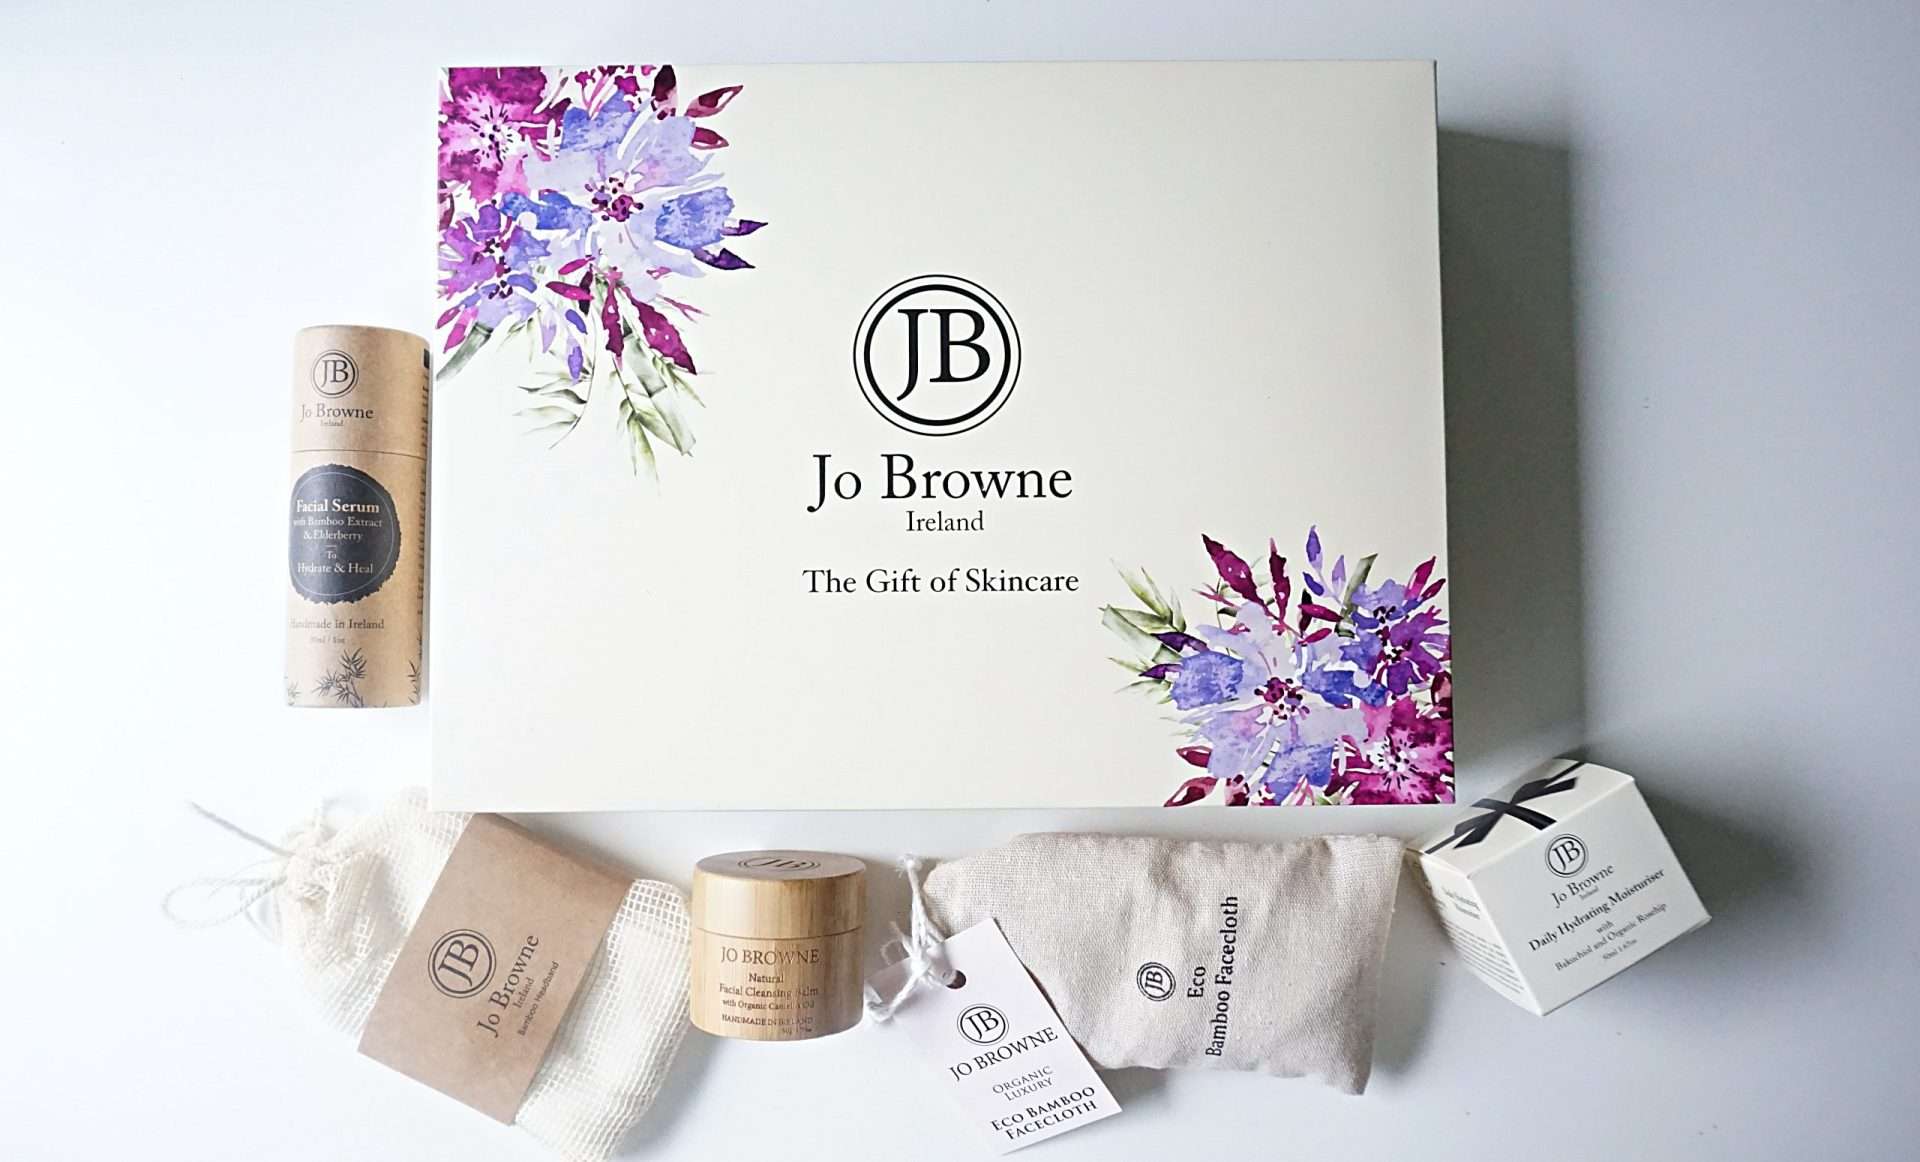 Jo Browne, The Gift of Skincare